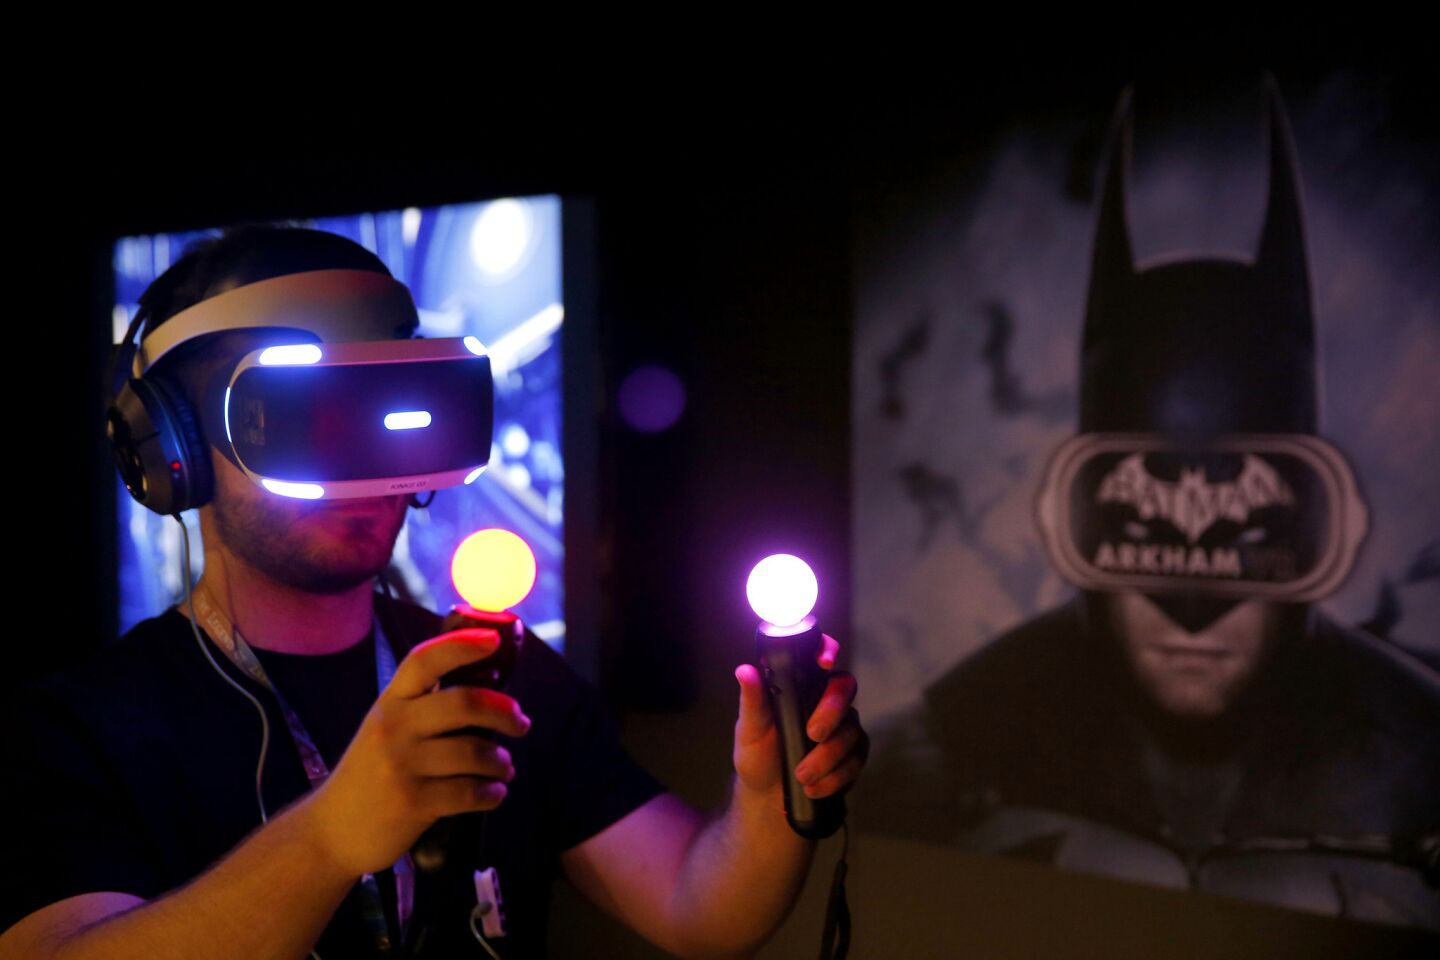 Jordan Maron plays Warner Bros. Interactive Entertainment and DC Entertainment's "Batman: Arkham" VR game at the Los Angeles Convention Center.